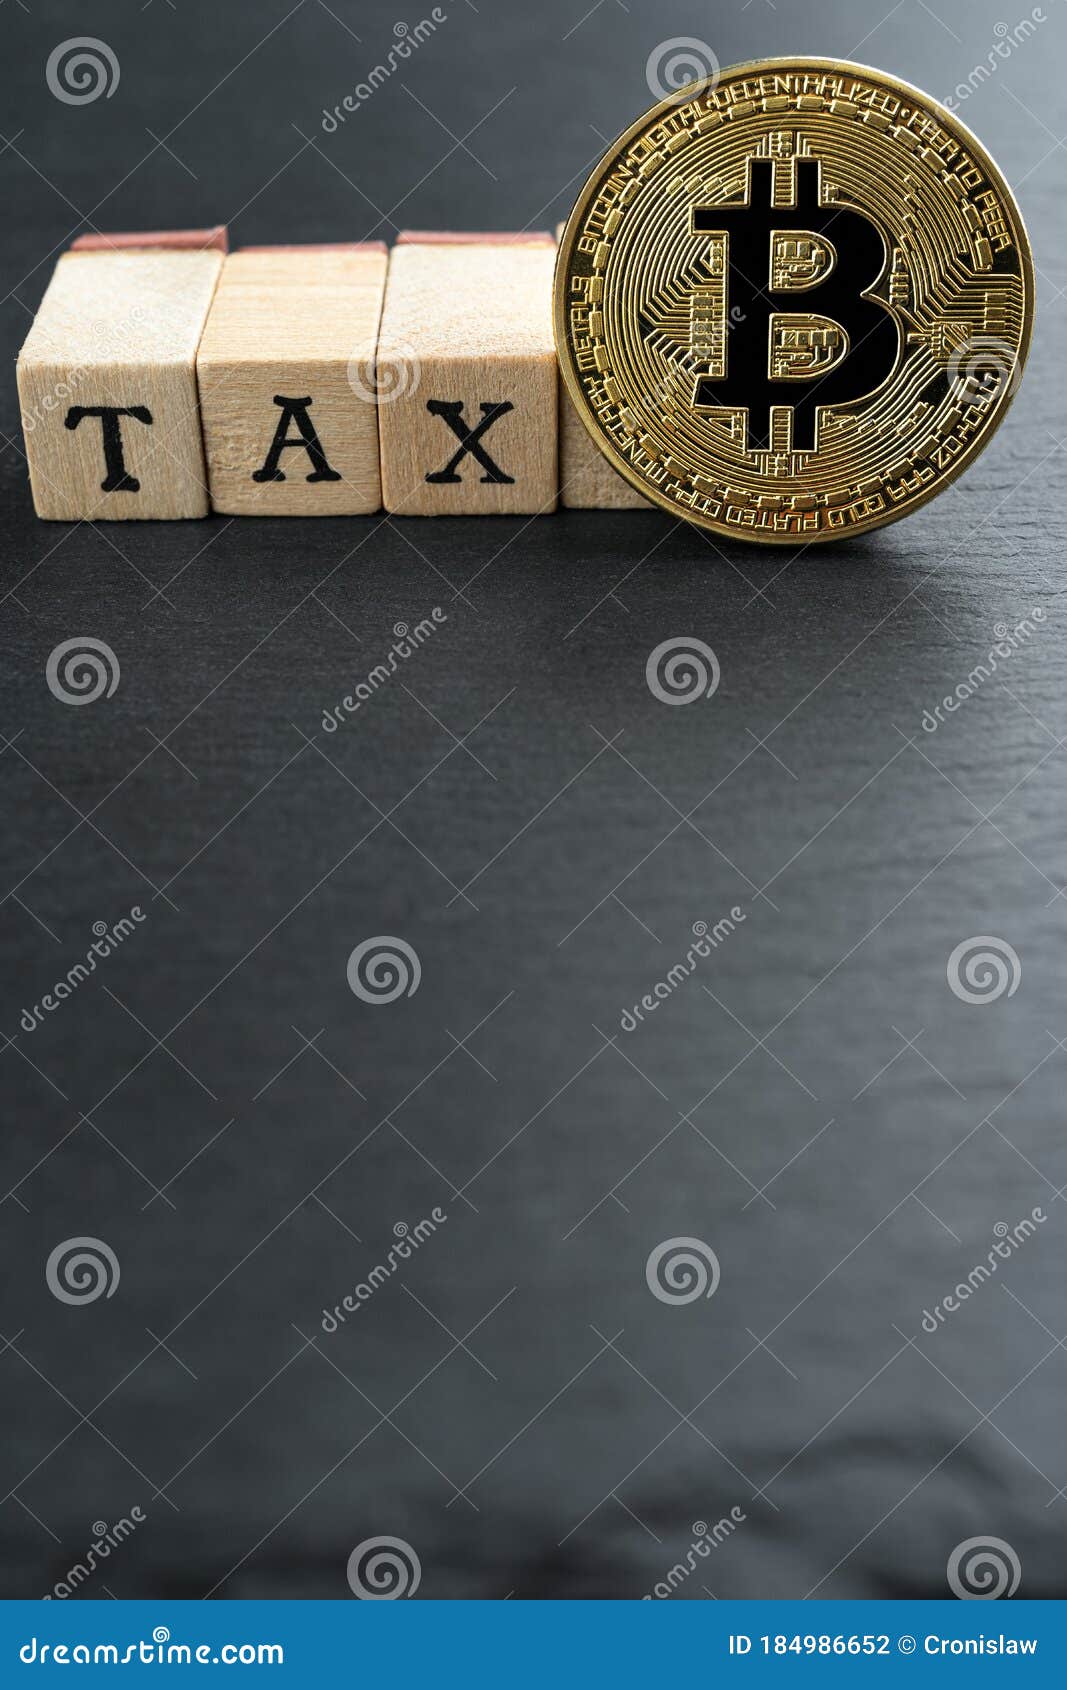 Physical Bitcoin Gold Coin With Tax Text Stock Photo ...